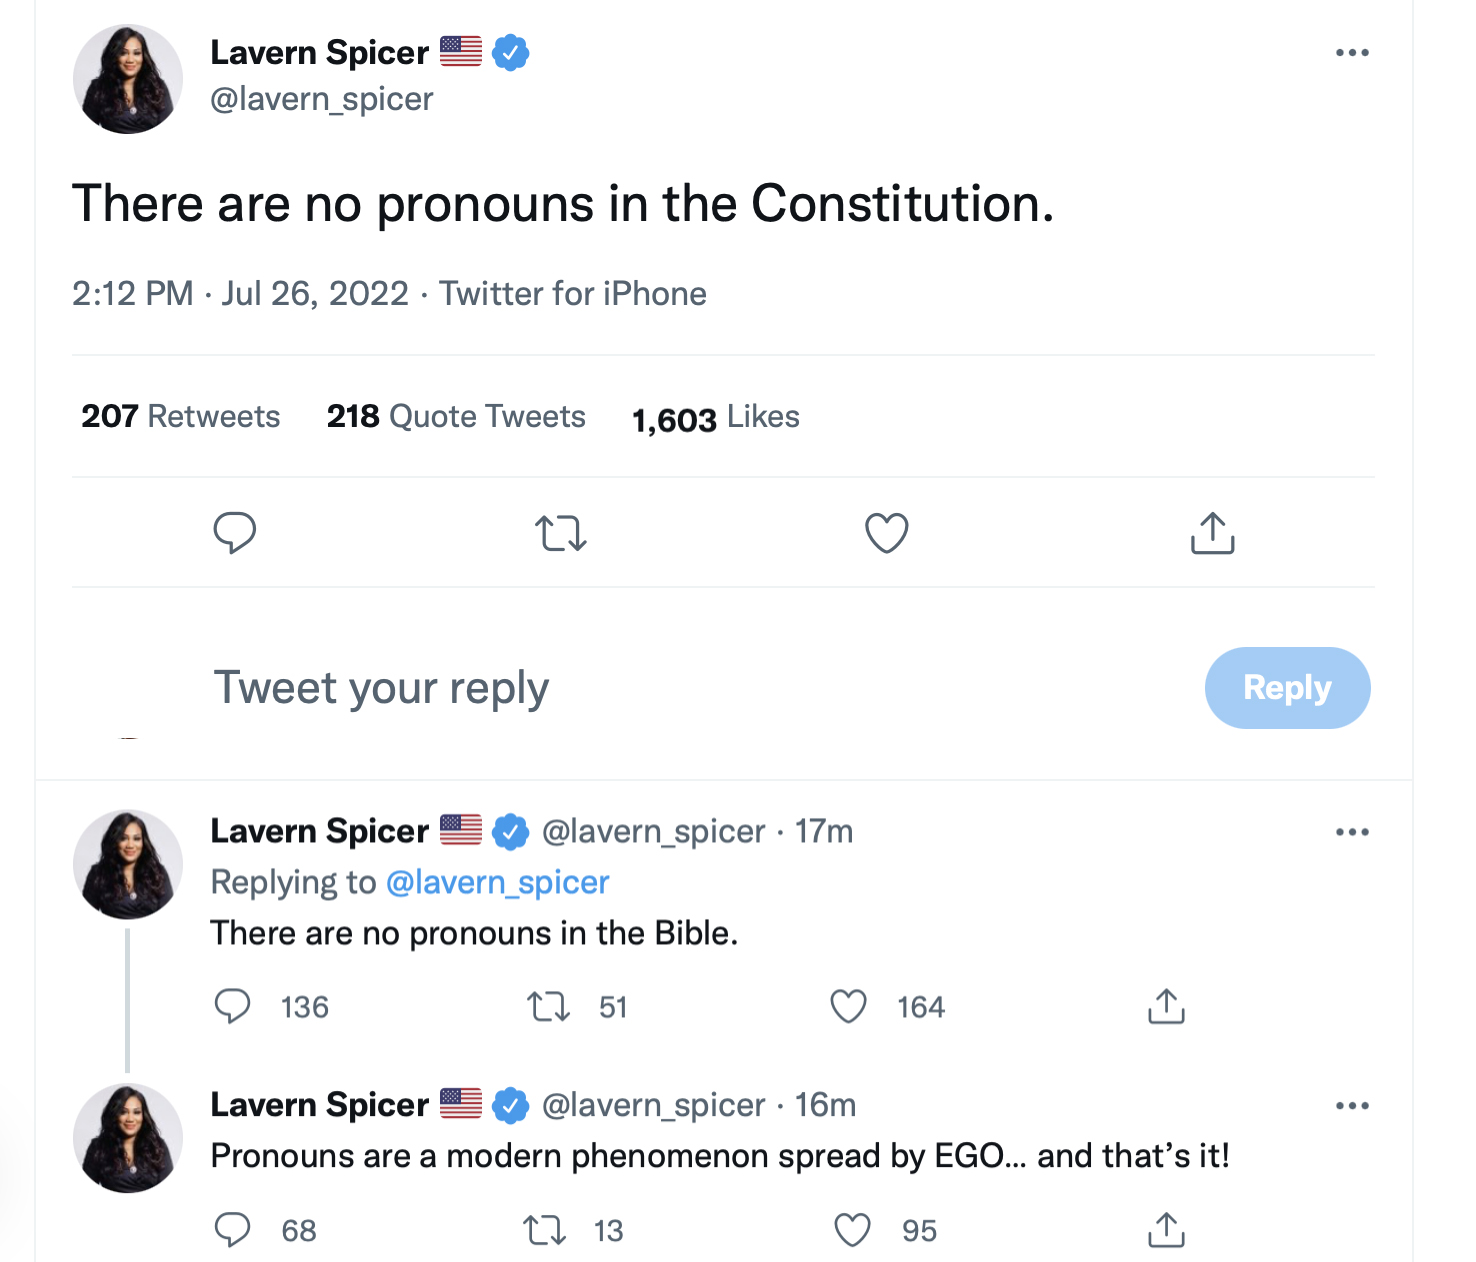 Lavern Spicer tweet: There are no pronouns in the Constitution; there are no pronouns in the Bible; pronouns are a modern phenomenon spre4ad by EGO, that’s it.